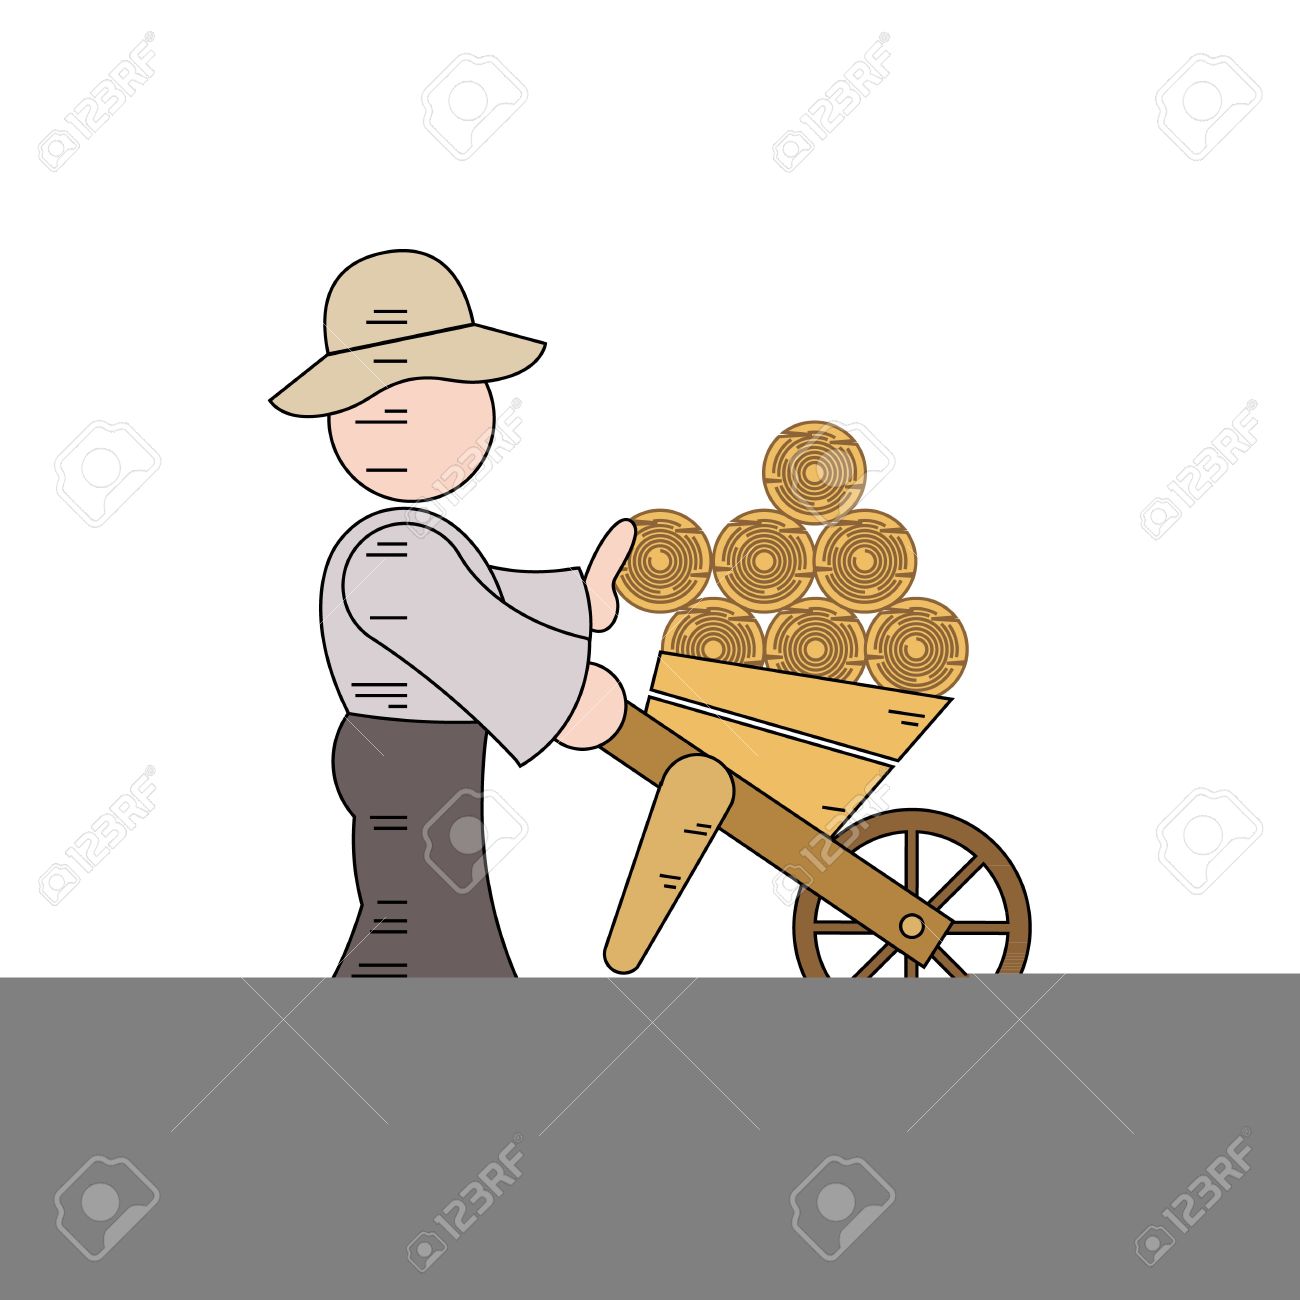 Cartoon Character Of A Woodcutter Carrying Logs Vector.